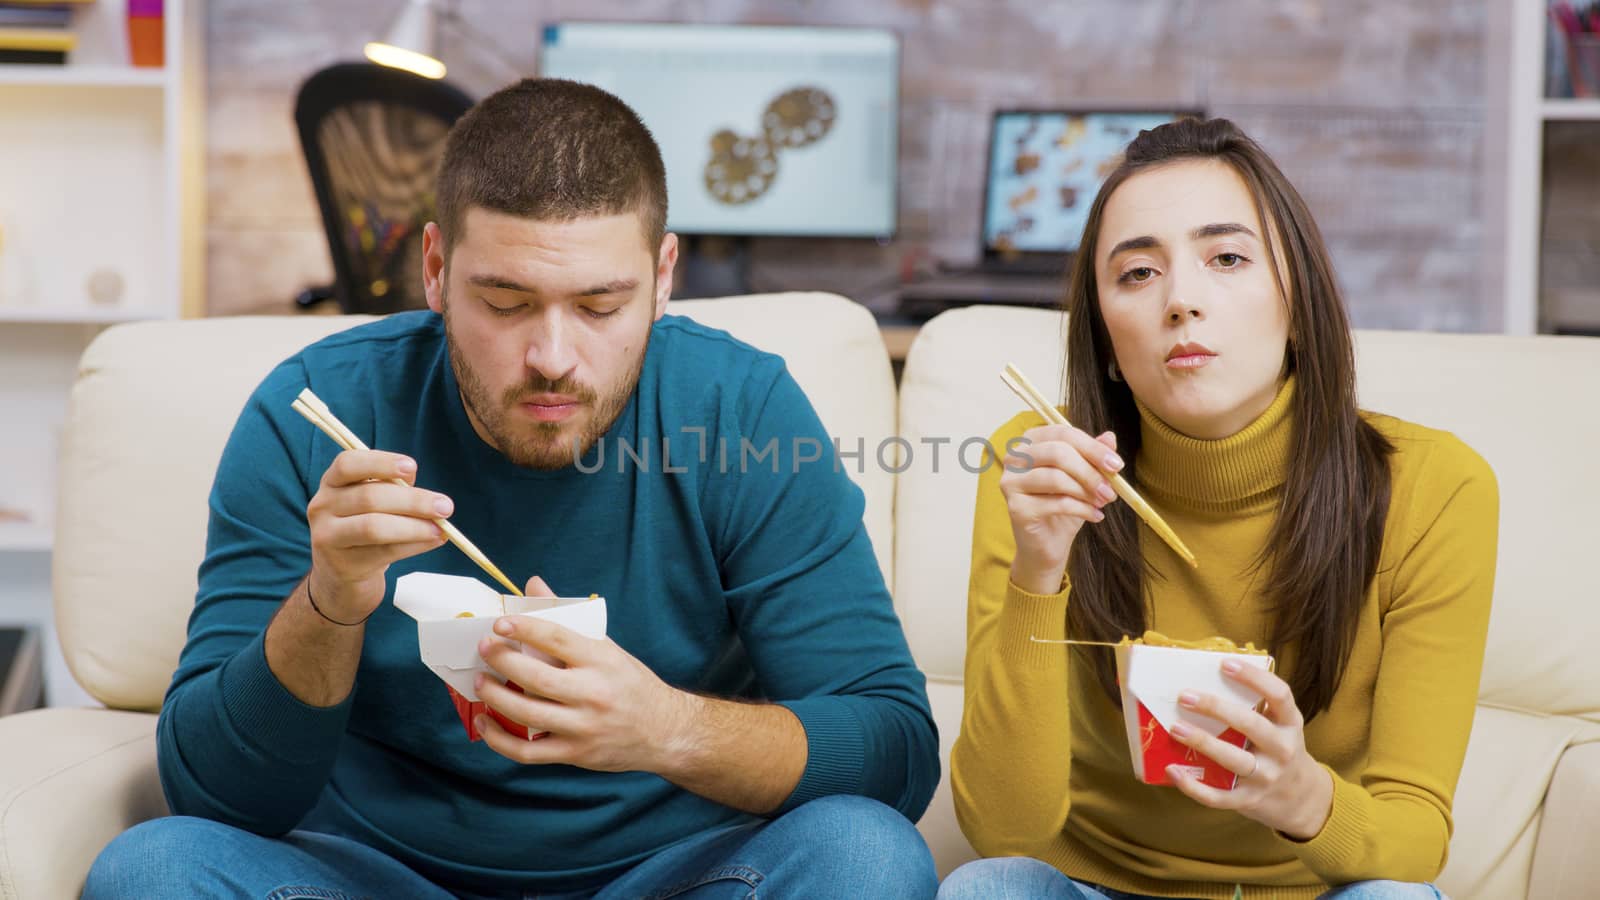 Bearded man and his girlfriend eating noodles with chopsticks while watching tv.